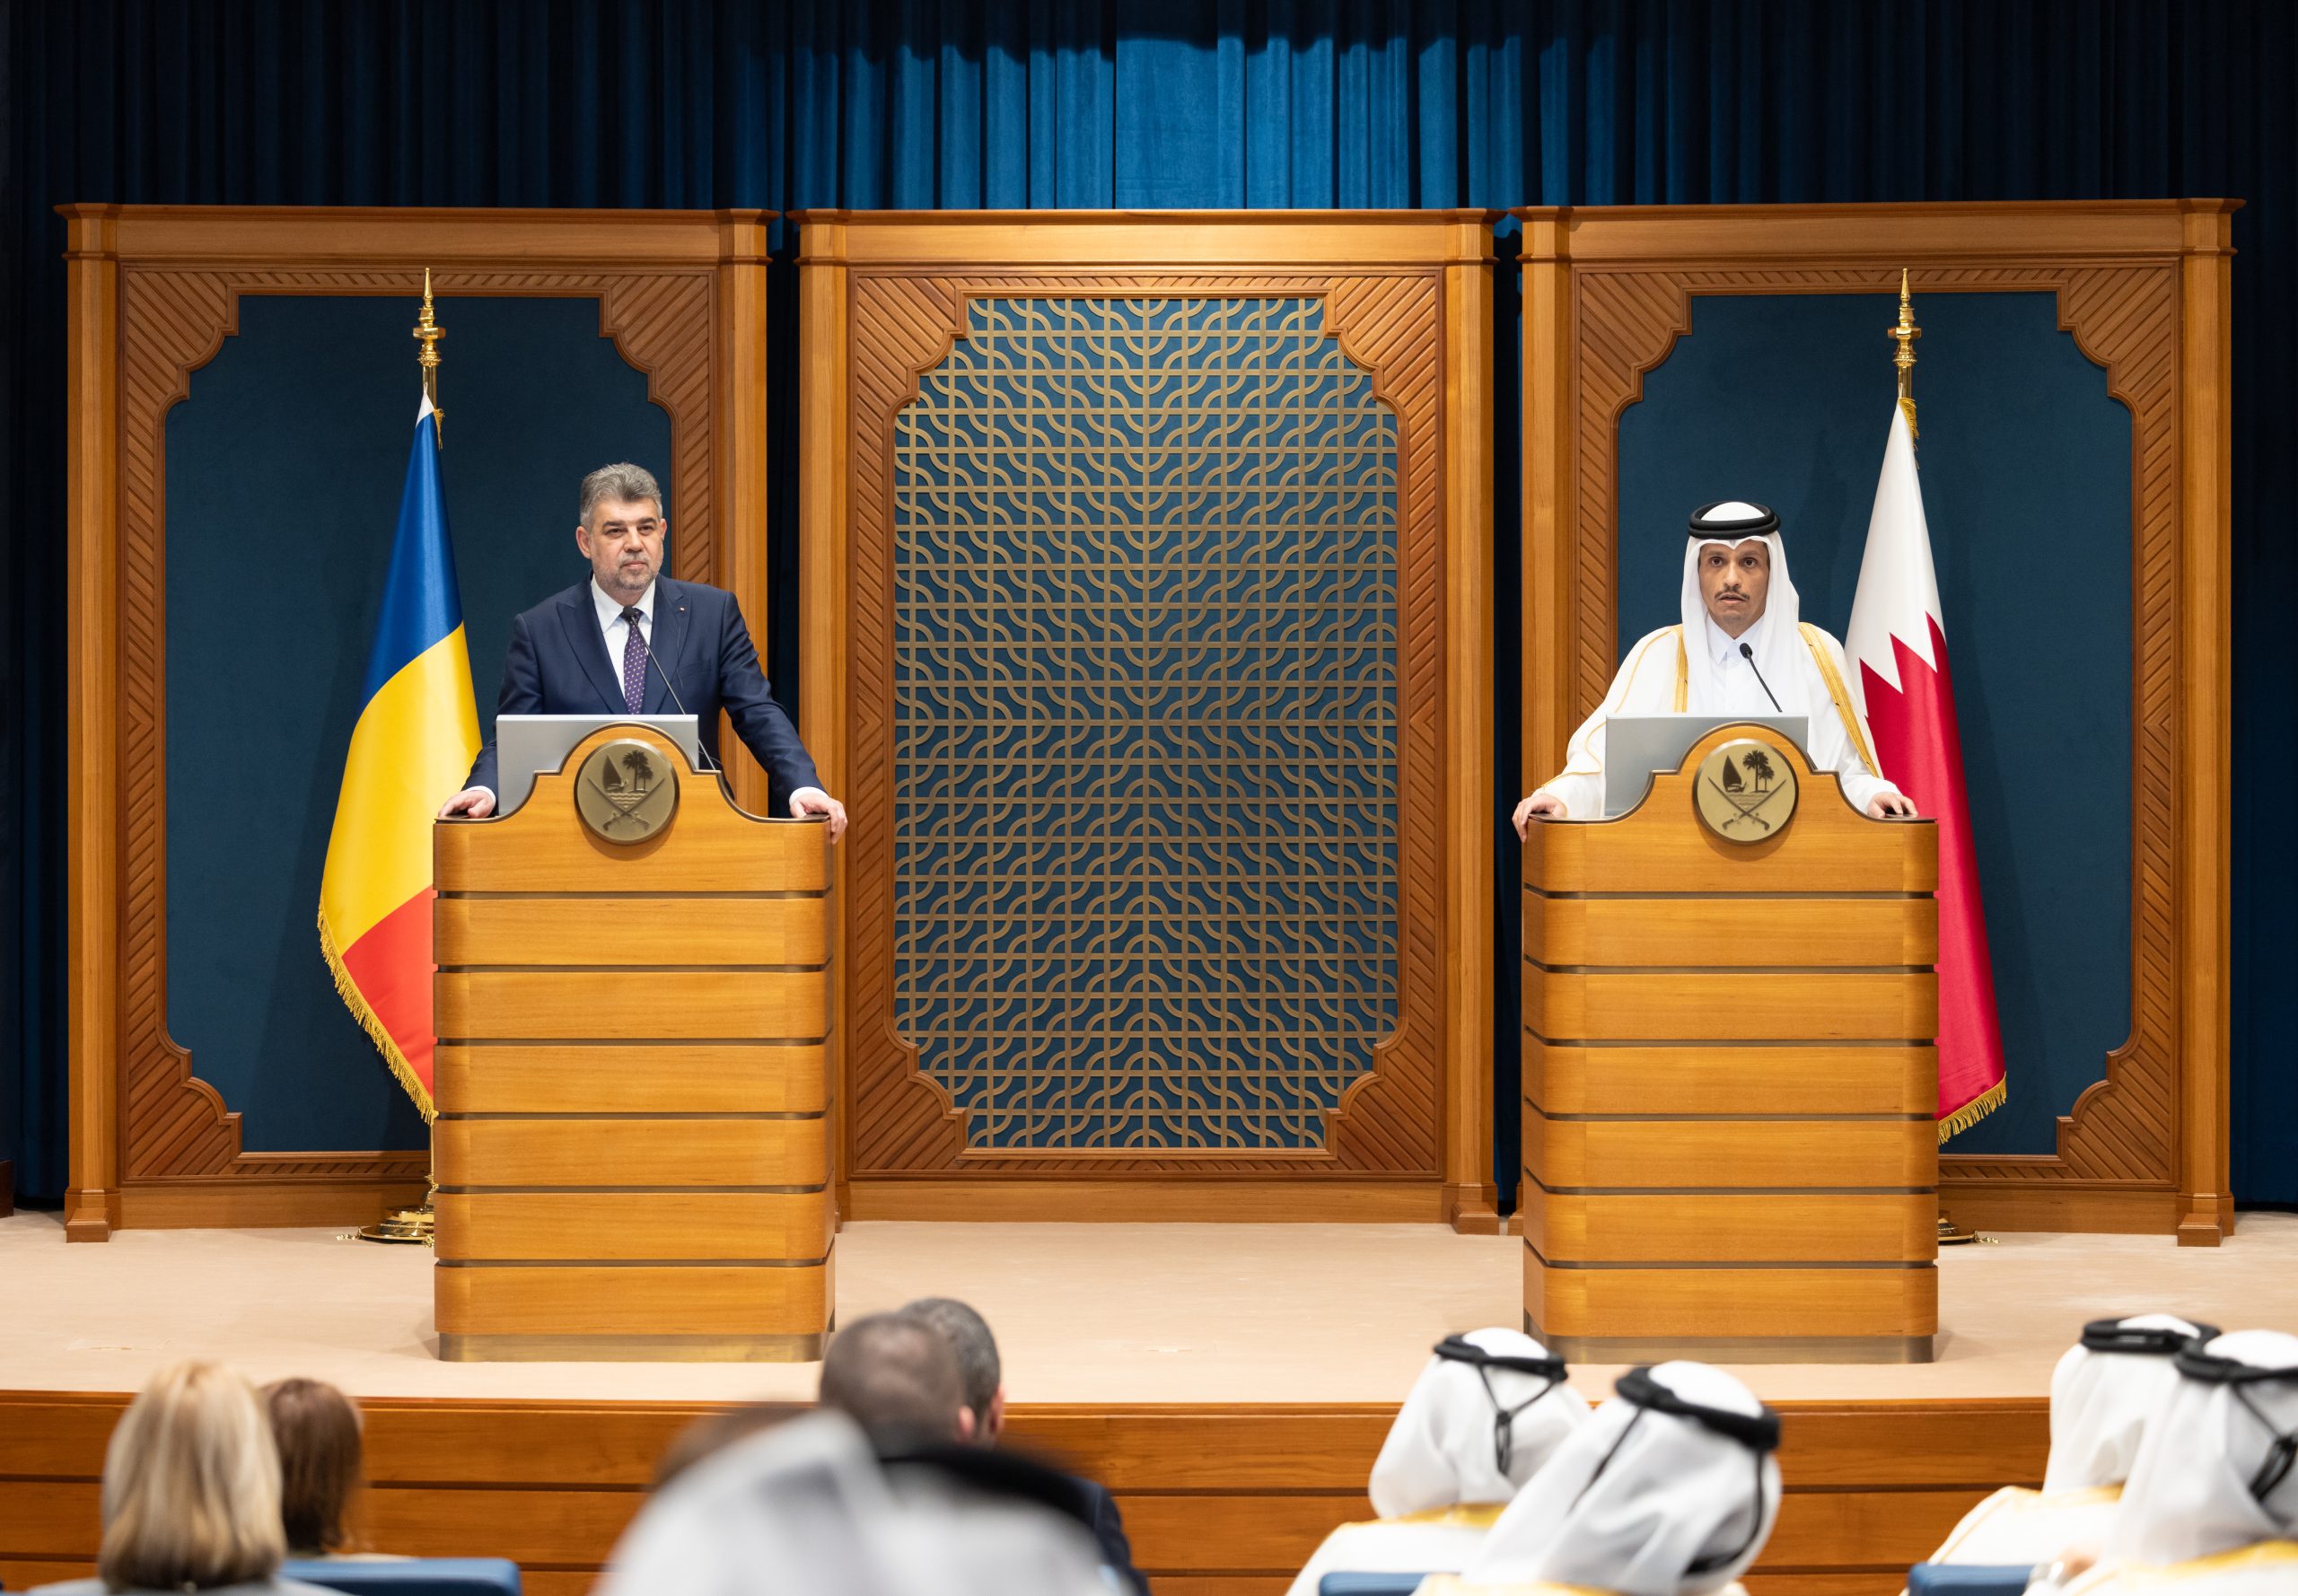 Qatar and Kuwait to enhance direct investment and civil service affairs